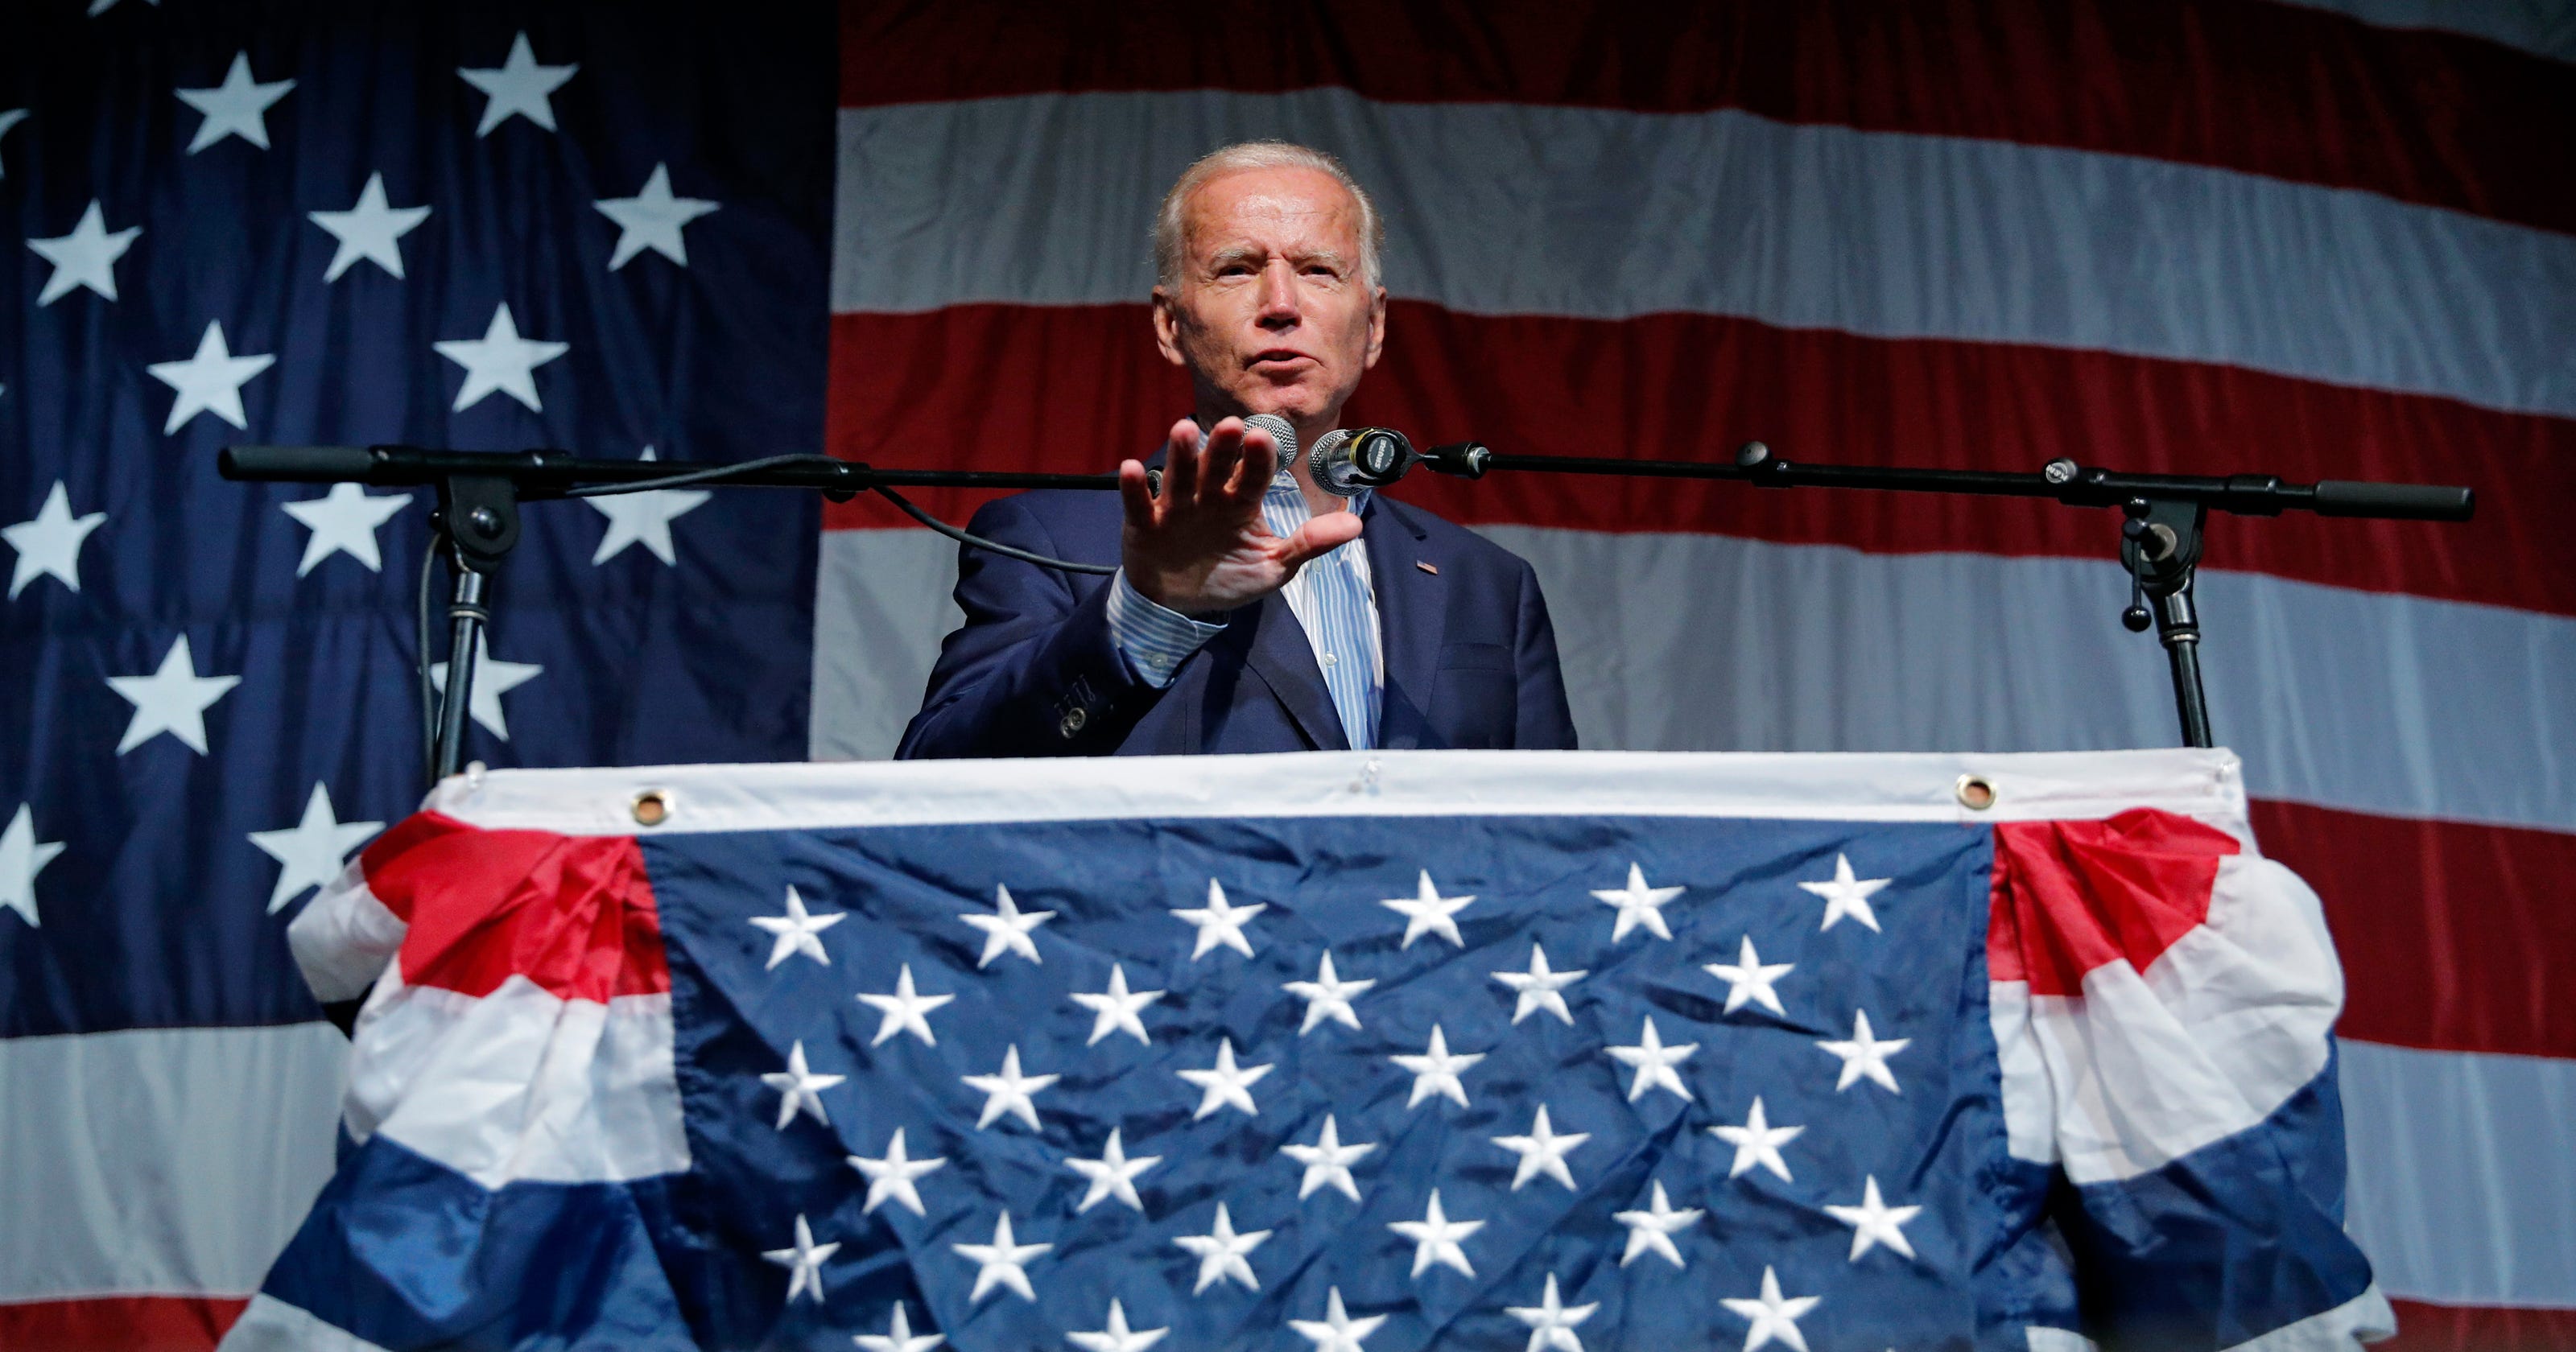 Joe Biden Is Prone To Gaffes But Democratic Voters Dont Seem To Care 4165